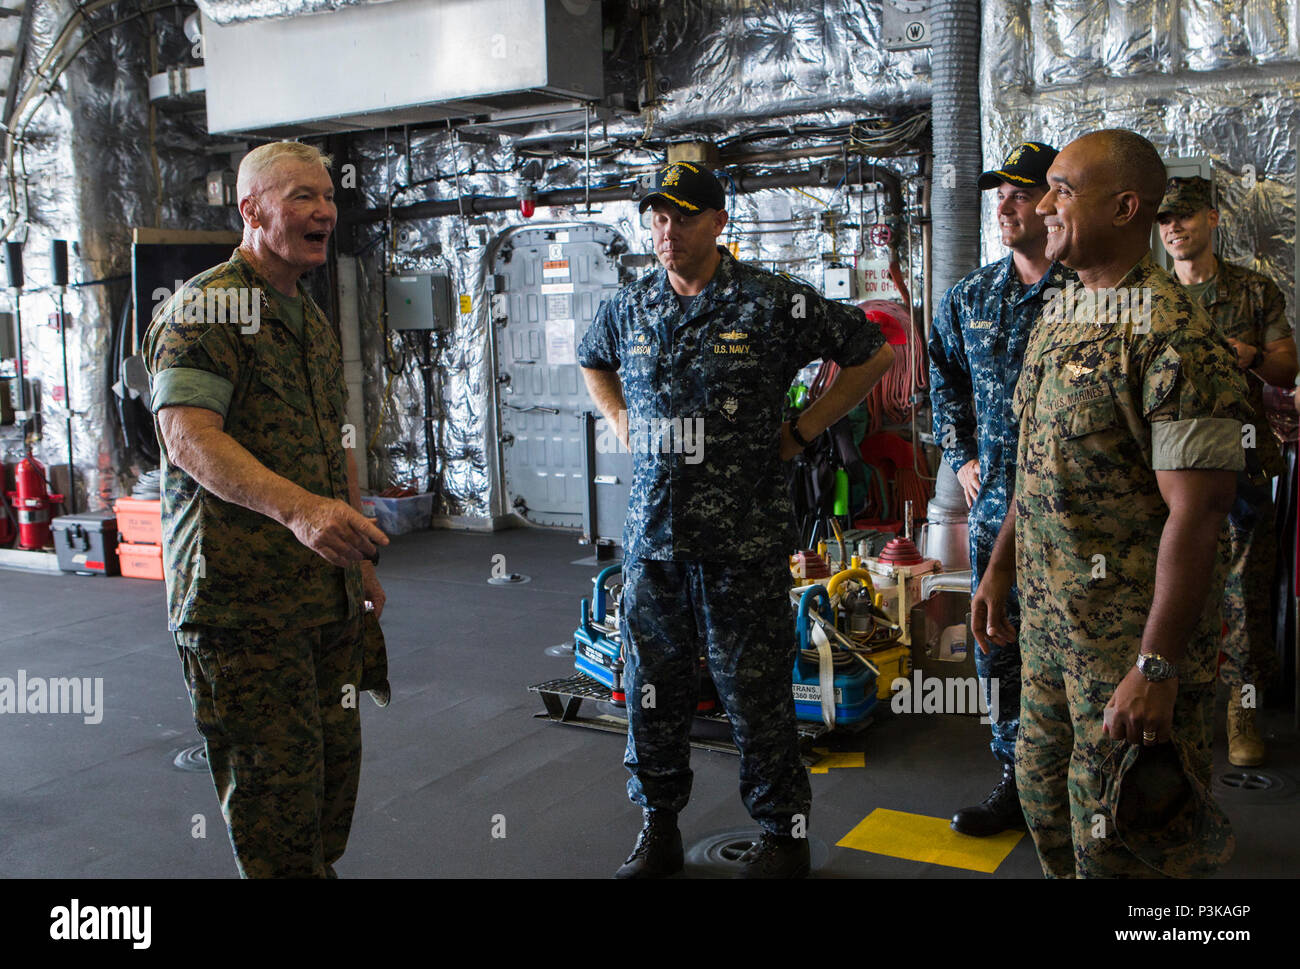 160708-M-QQ799-055 JOINT BASE PEARL HARBOR-HICKAM (July 8, 2016) Lt. Gen. John A. Toolan, U.S. Marine Corps Forces, Pacific commander, visits USS Coronado during Exercise Rim of the Pacific 2016. Twenty-six nations, 49 ships, six submarines, about 200 aircraft, and 25,000 personnel are participating in RIMPAC from June 29 to Aug. 4 in and around the Hawaiian Islands and Southern California. The world’s largest international maritime exercise, RIMPAC provides a unique training opportunity while fostering and sustaining cooperative relationships between participants critical to ensuring the safe Stock Photo